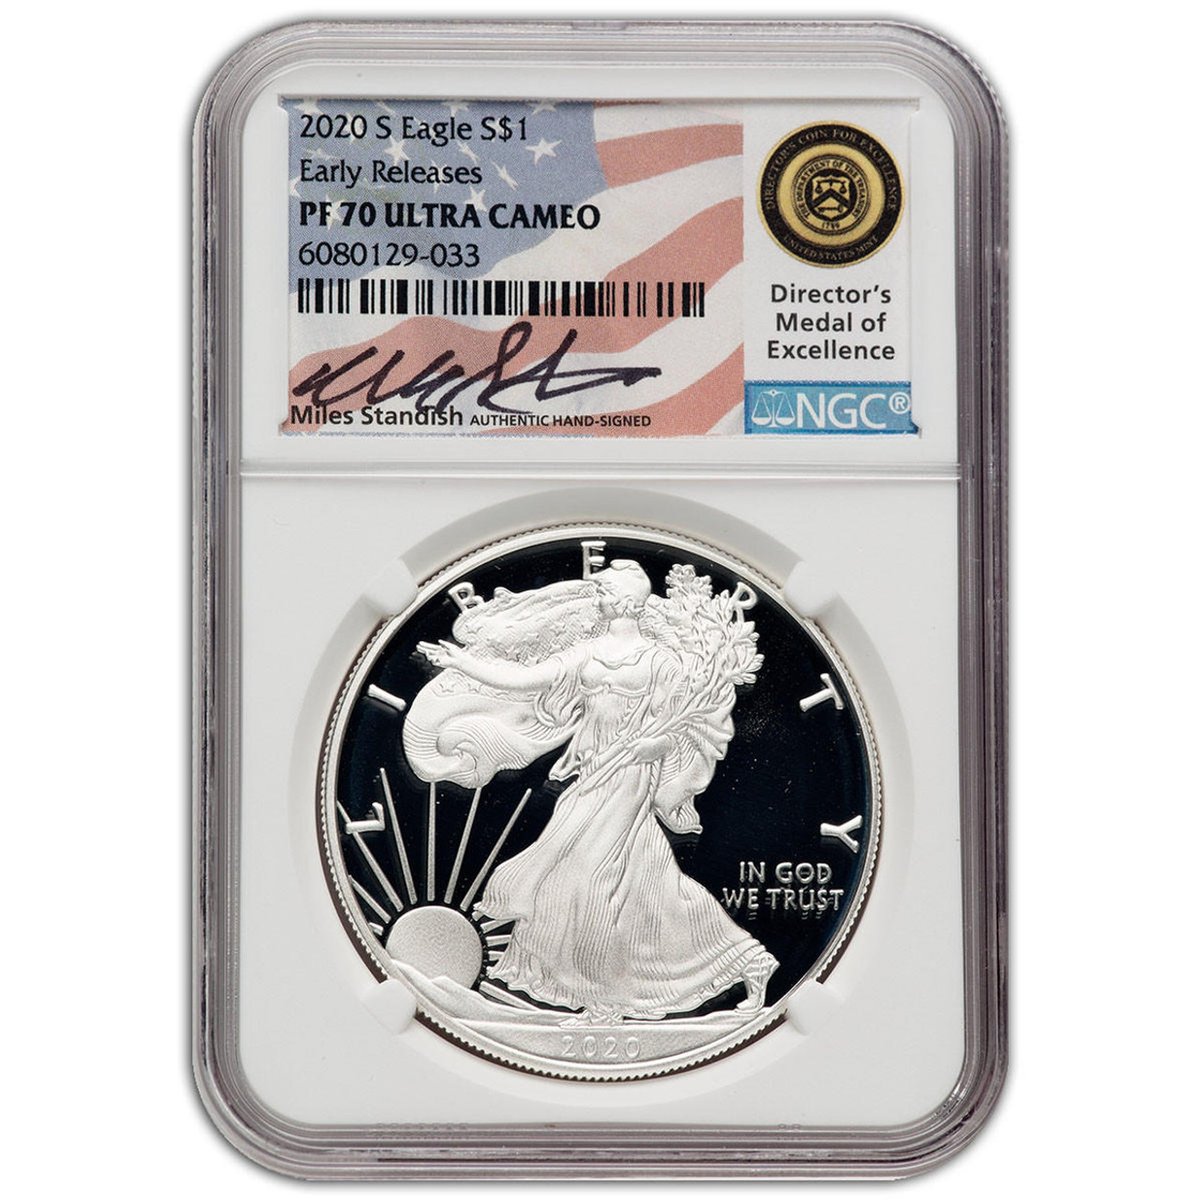 This 2020-S Proof Silver Eagle is special was supposed to be the last Heraldic Eagle Proof Silver Eagle ever minted, features the special Miles Standish signed Director's Medal of Excellence label: bullionsharks.com/2020-s-silver-…

#usmint #rarecoins #silvereagle #jpmorgan #Silver